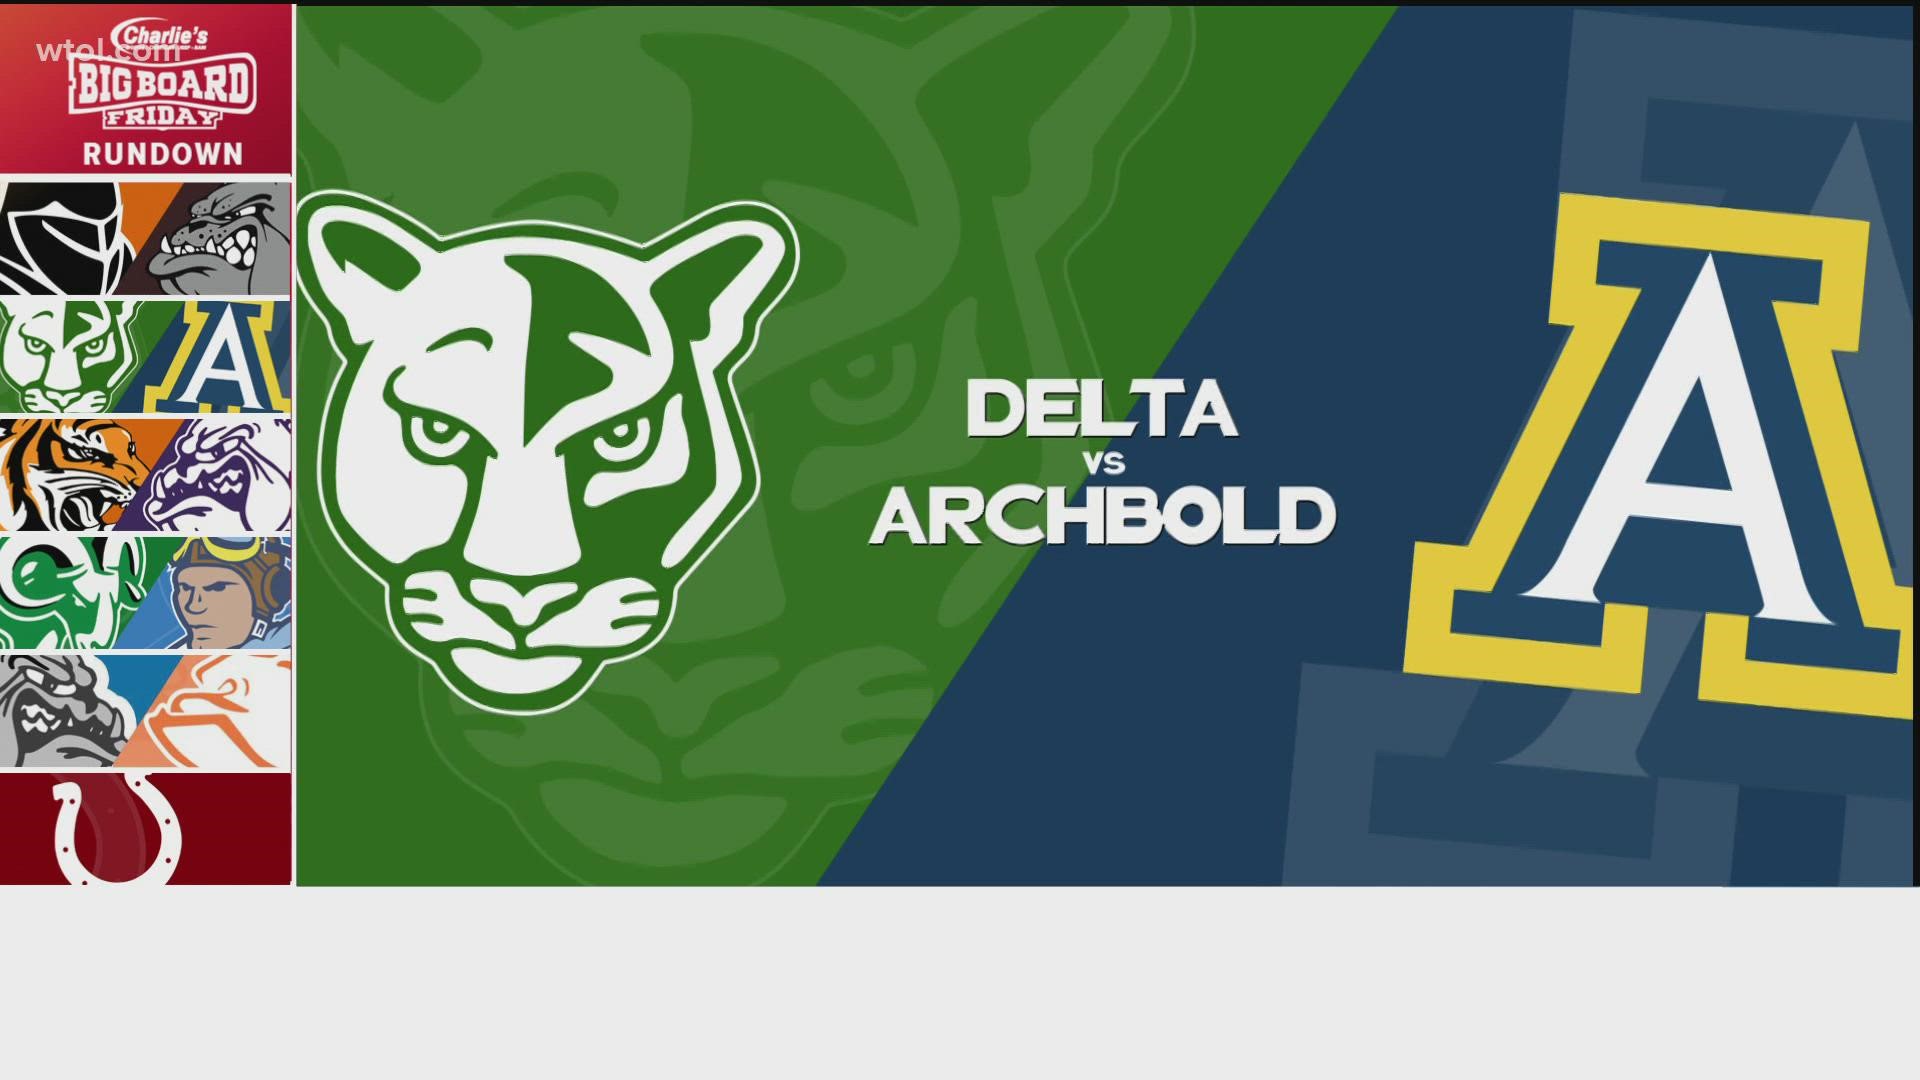 Archbold moves to 6-0 on the season after holding Delta to just a field goal.